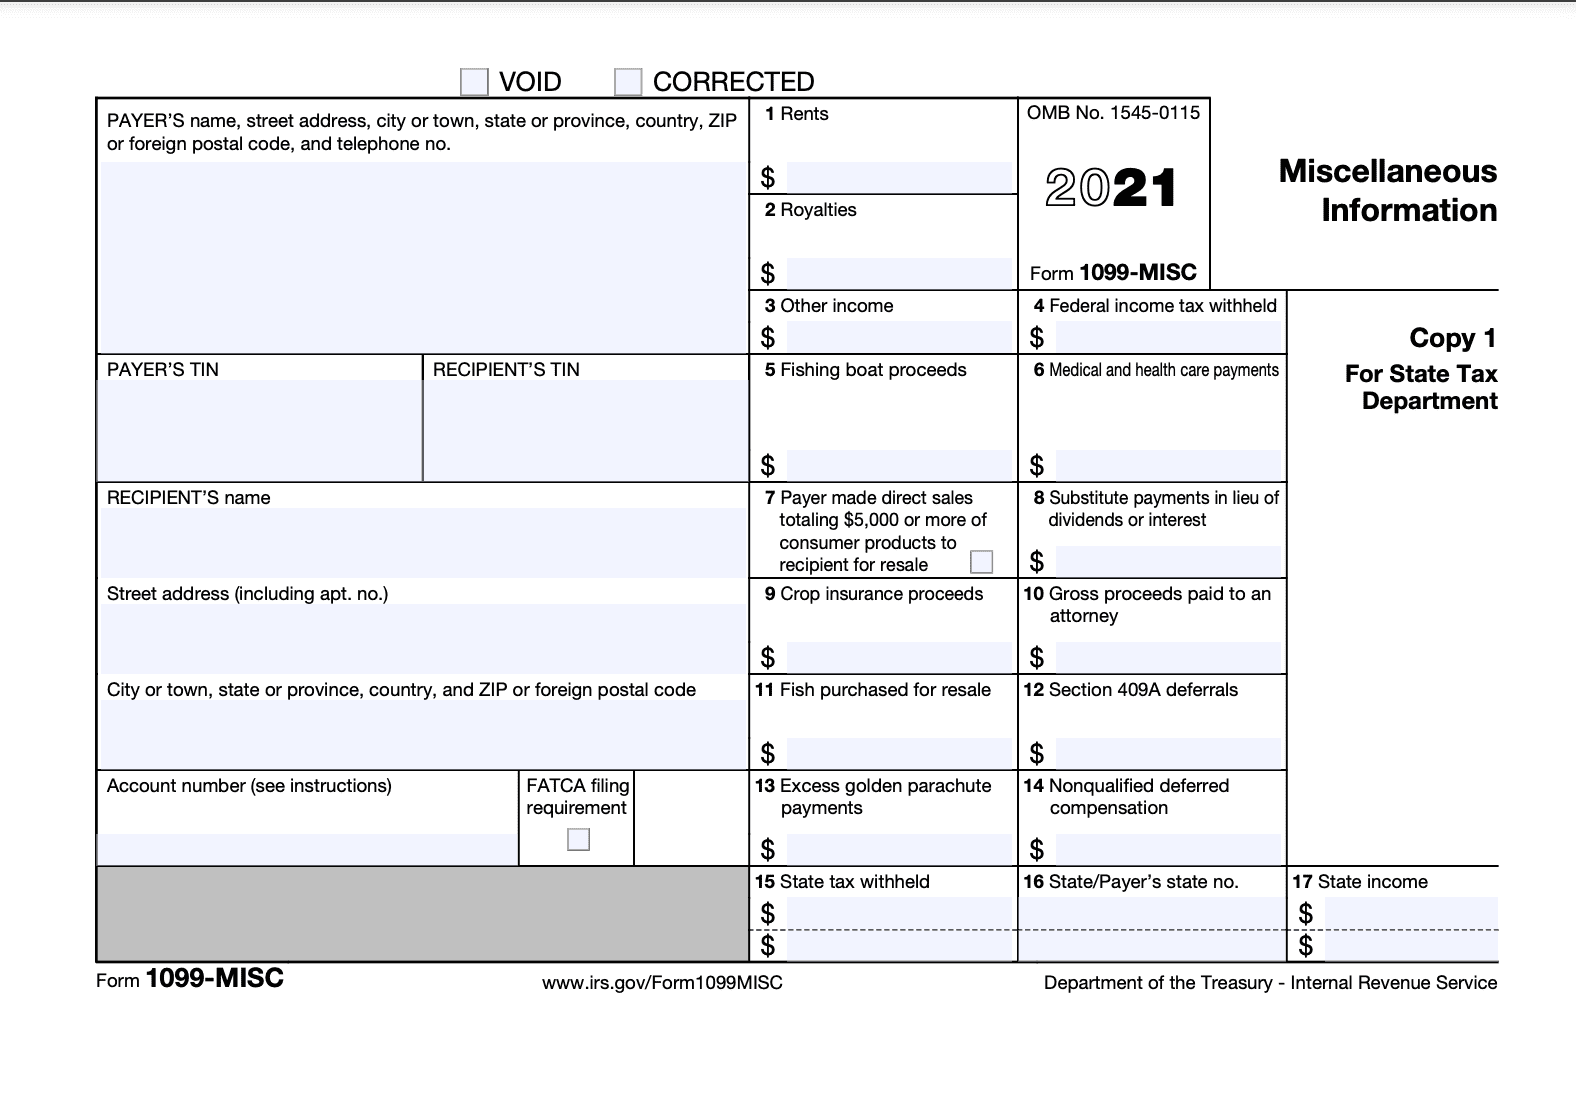 Image of Form 1099-MISC with instructions for reporting various types of income, taxes withheld, and recipient and payer information. Useful for freelancers and self-employed individuals.